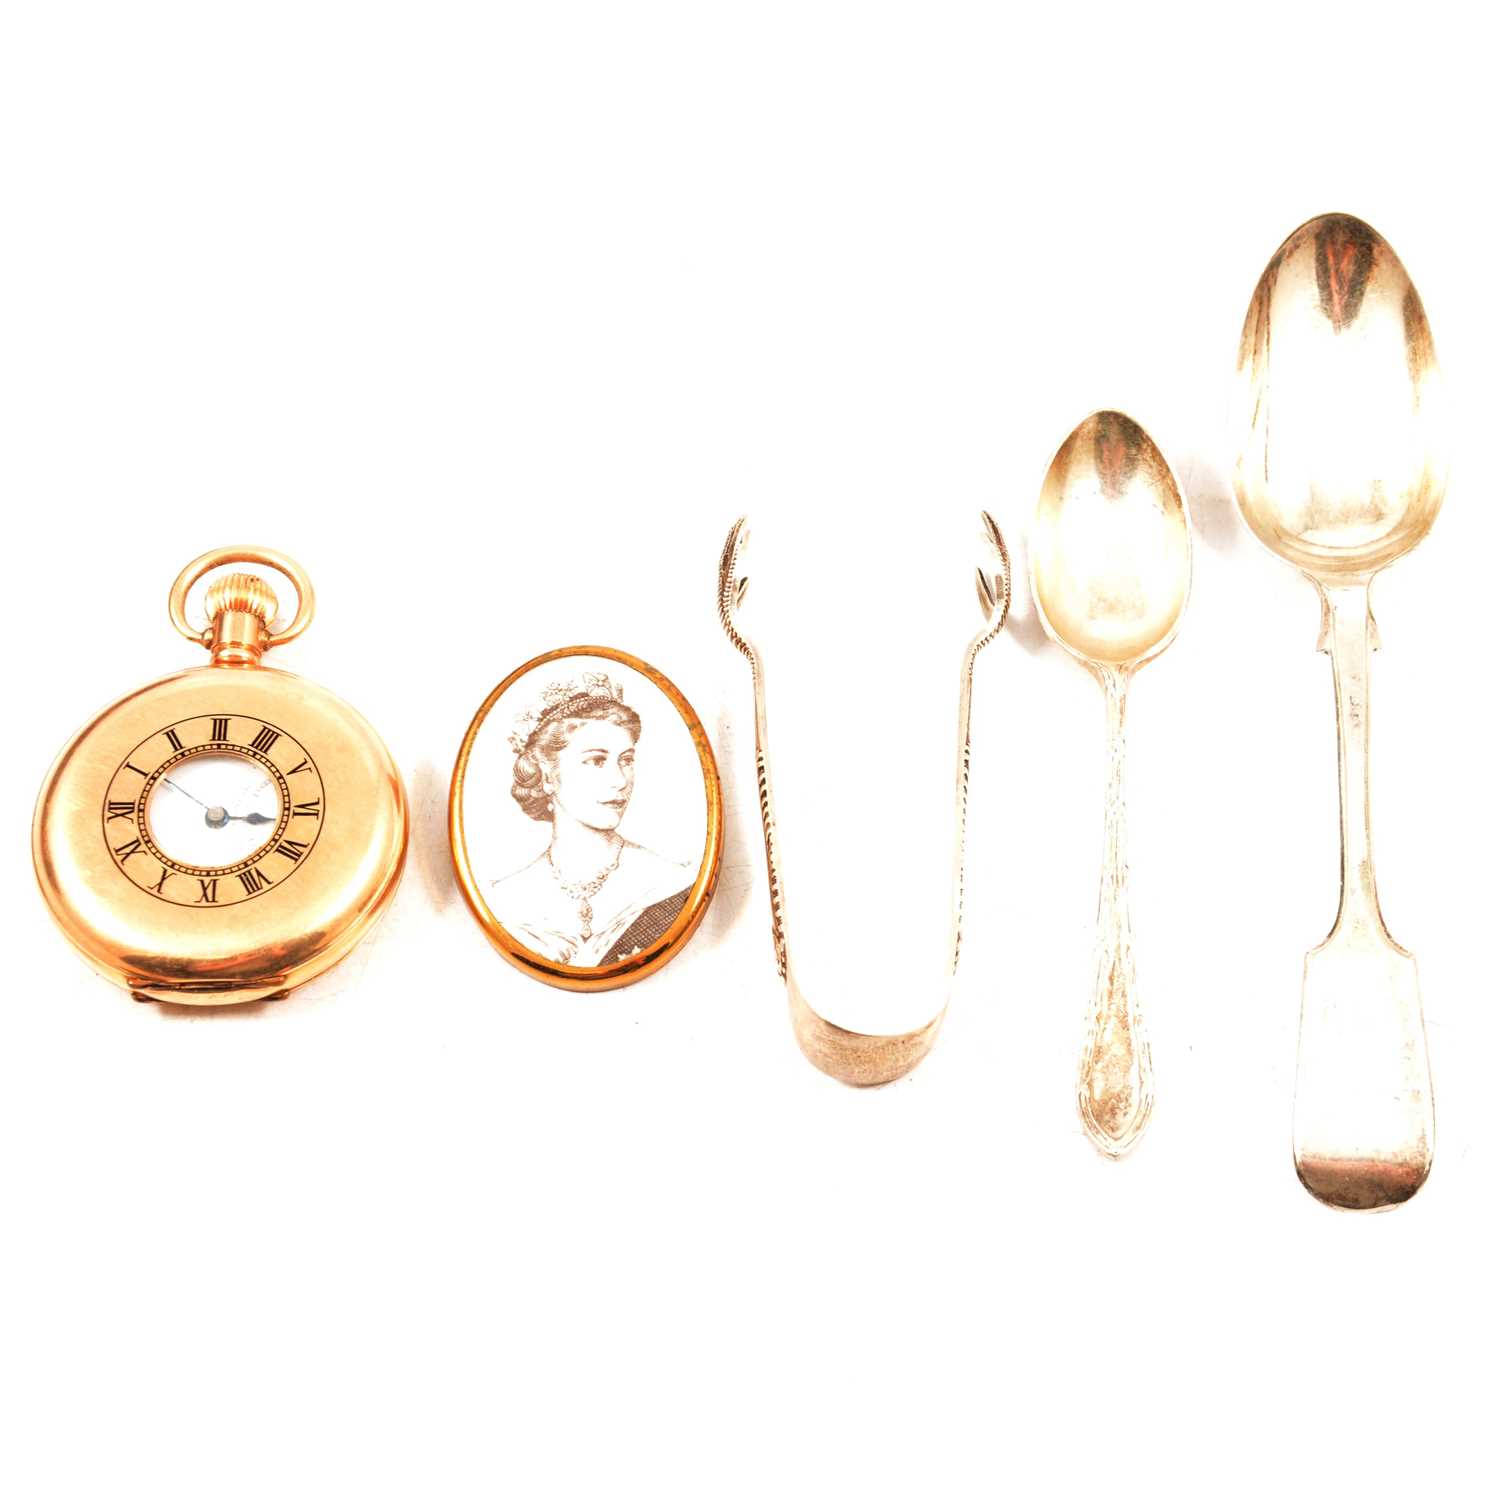 Lot 438 - A gold-plated half hunter pocket watch, double Albert watch chain, brooches and plated cutlery.